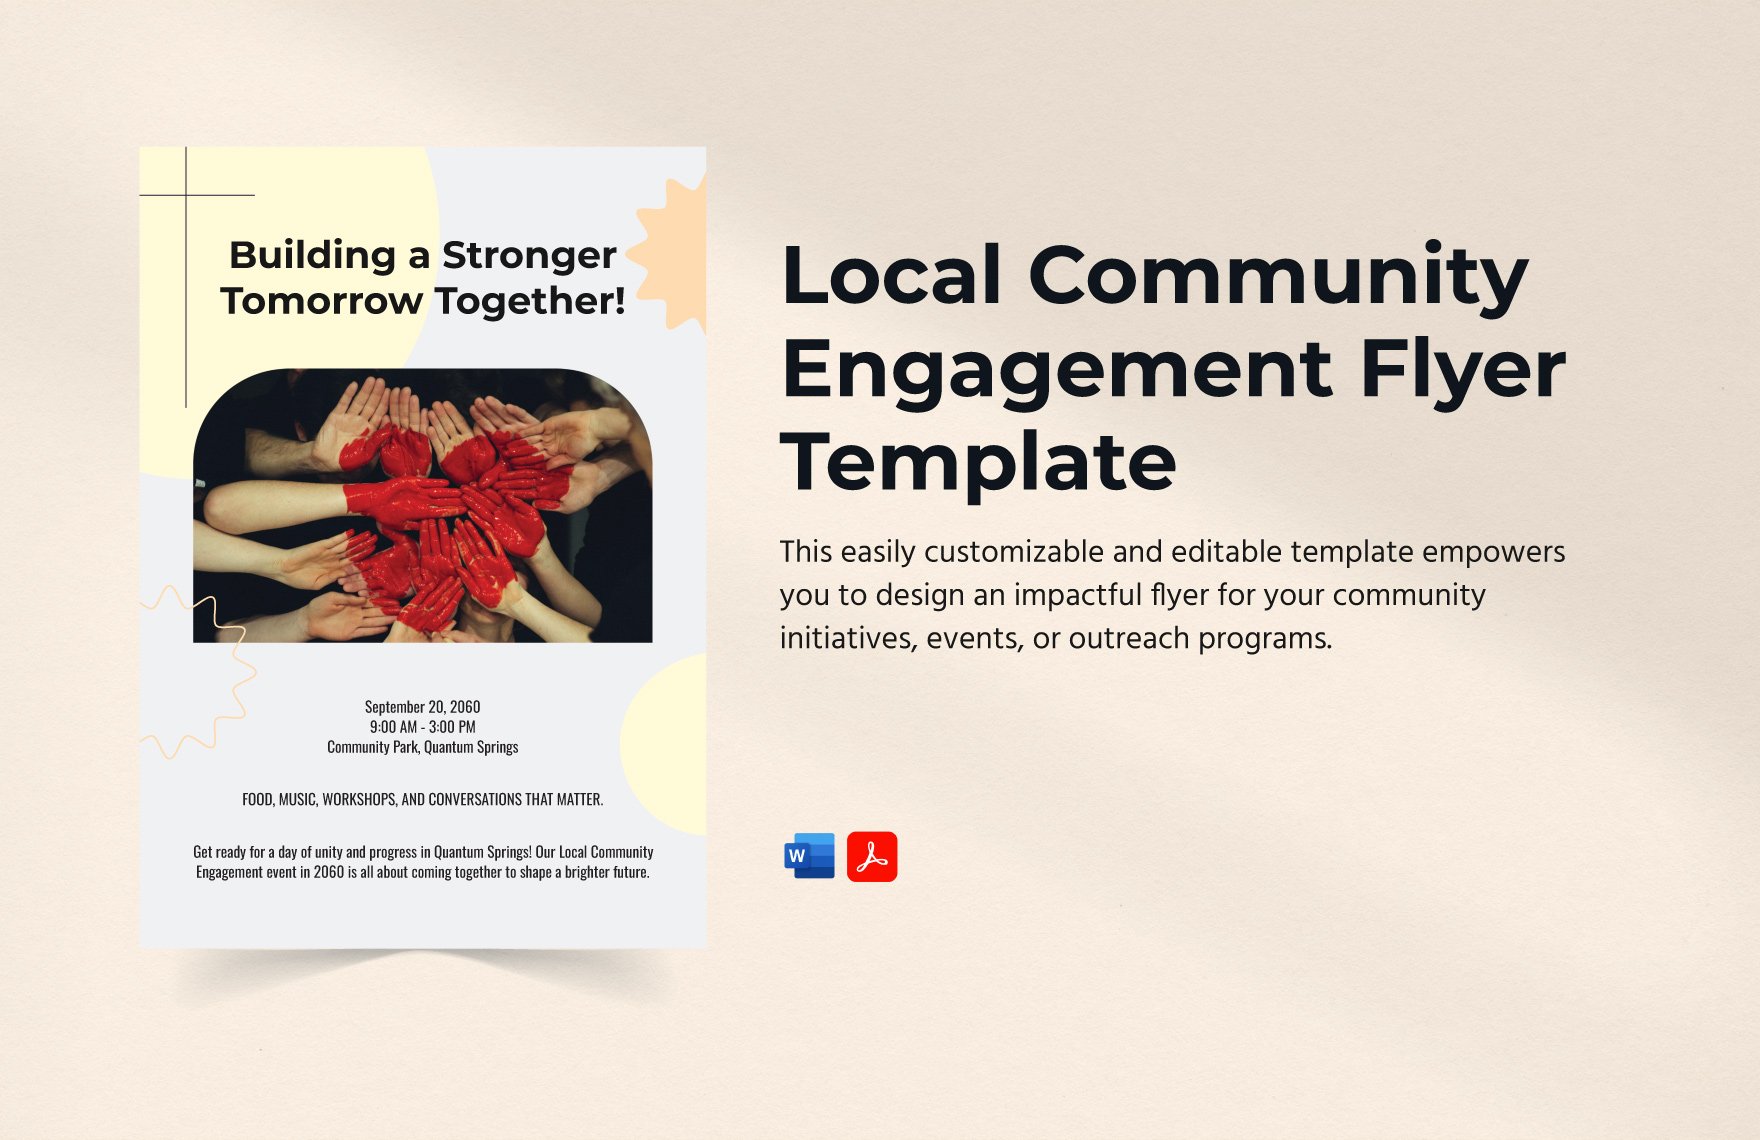 Local Community Engagement Flyer Template